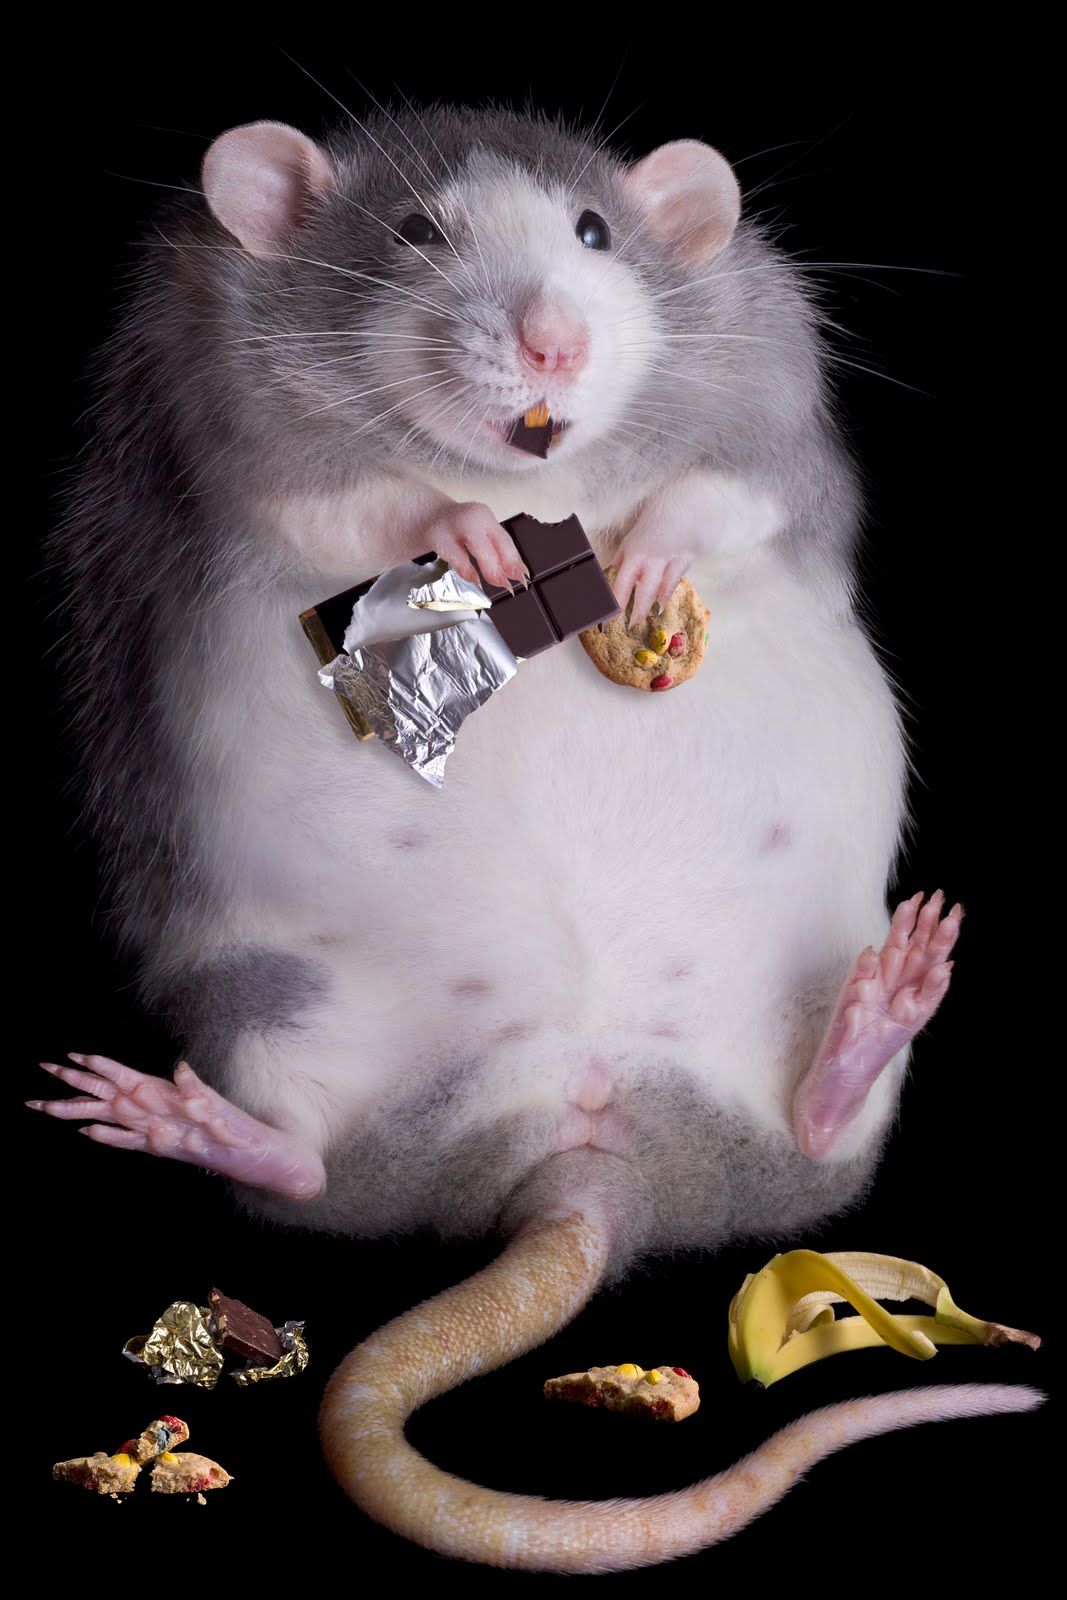 Amazing Funniest Animal Picture. Cute rats, Funny animals, Animals